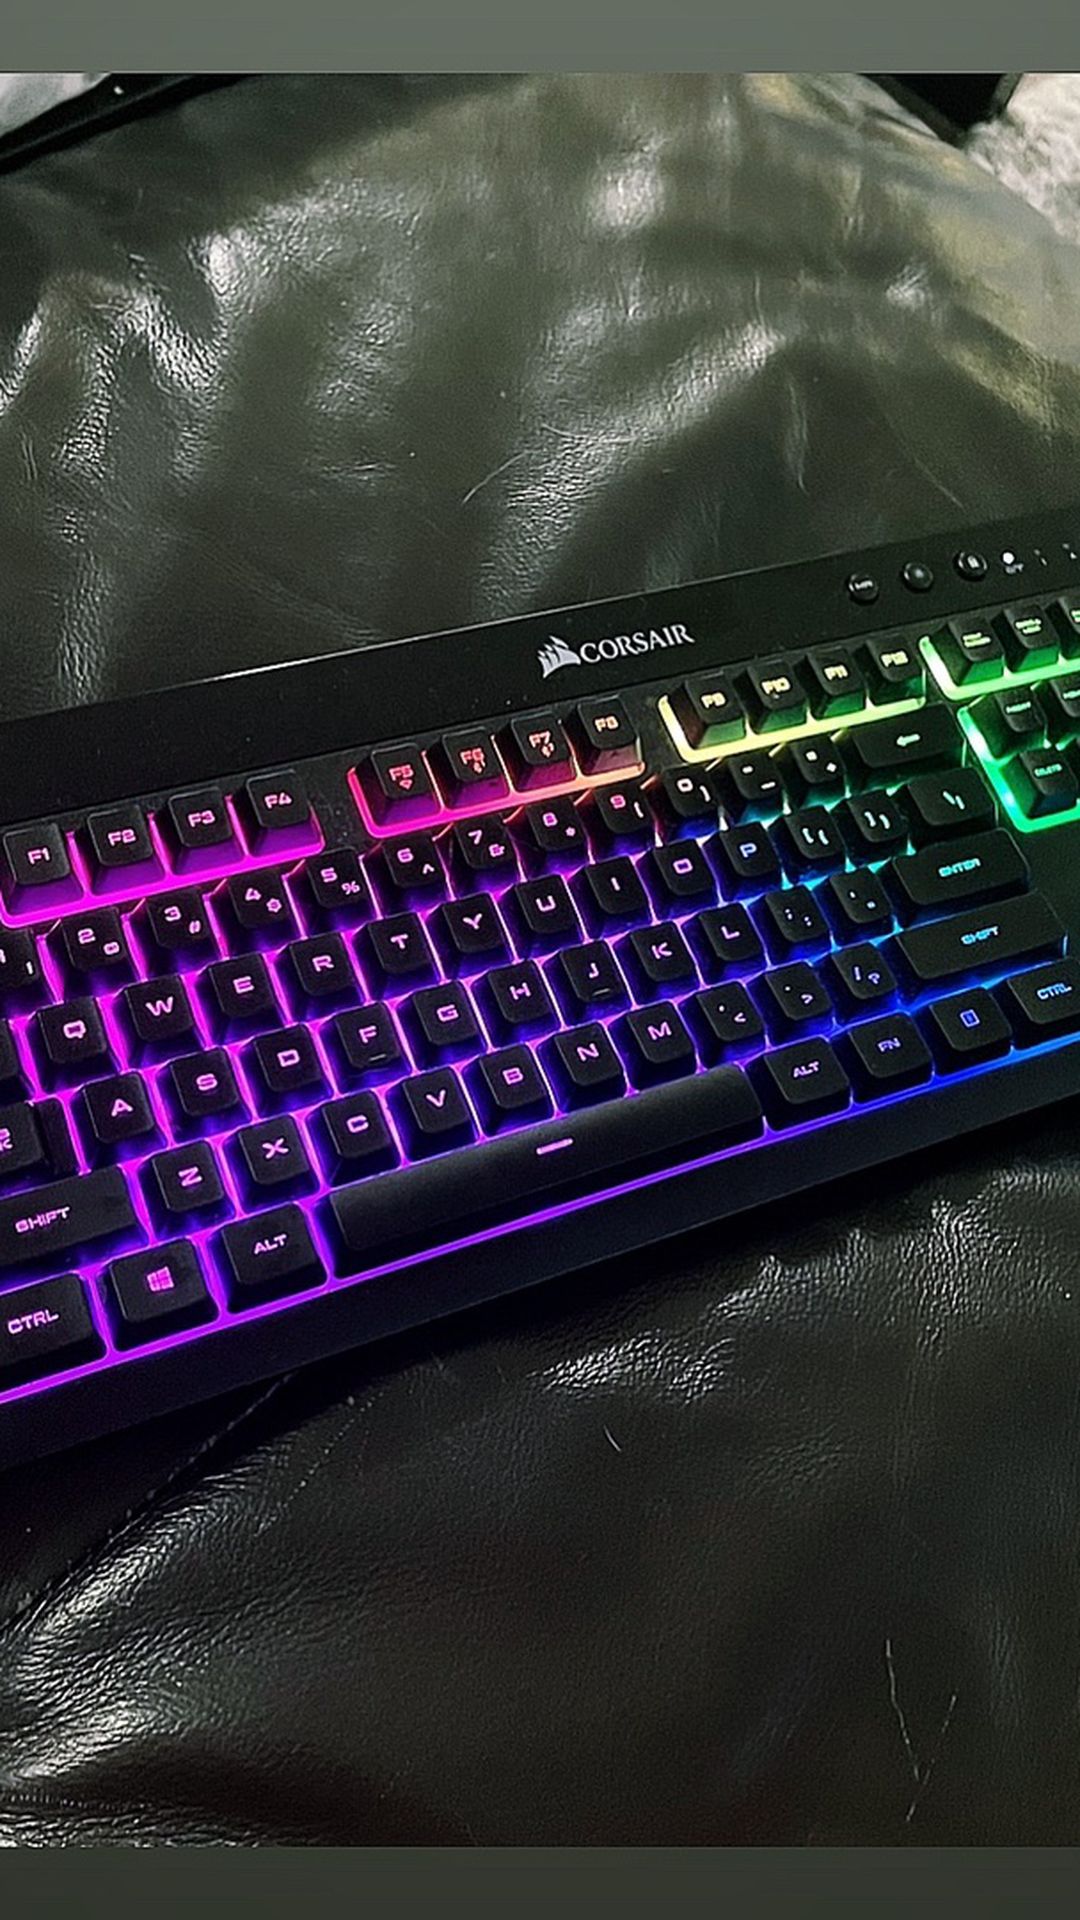 CORSAIR K57 RGB Wireless Gaming Keyboard - <1ms response time with Slipstream Wireless GREAT CONDITION LIKE NEW